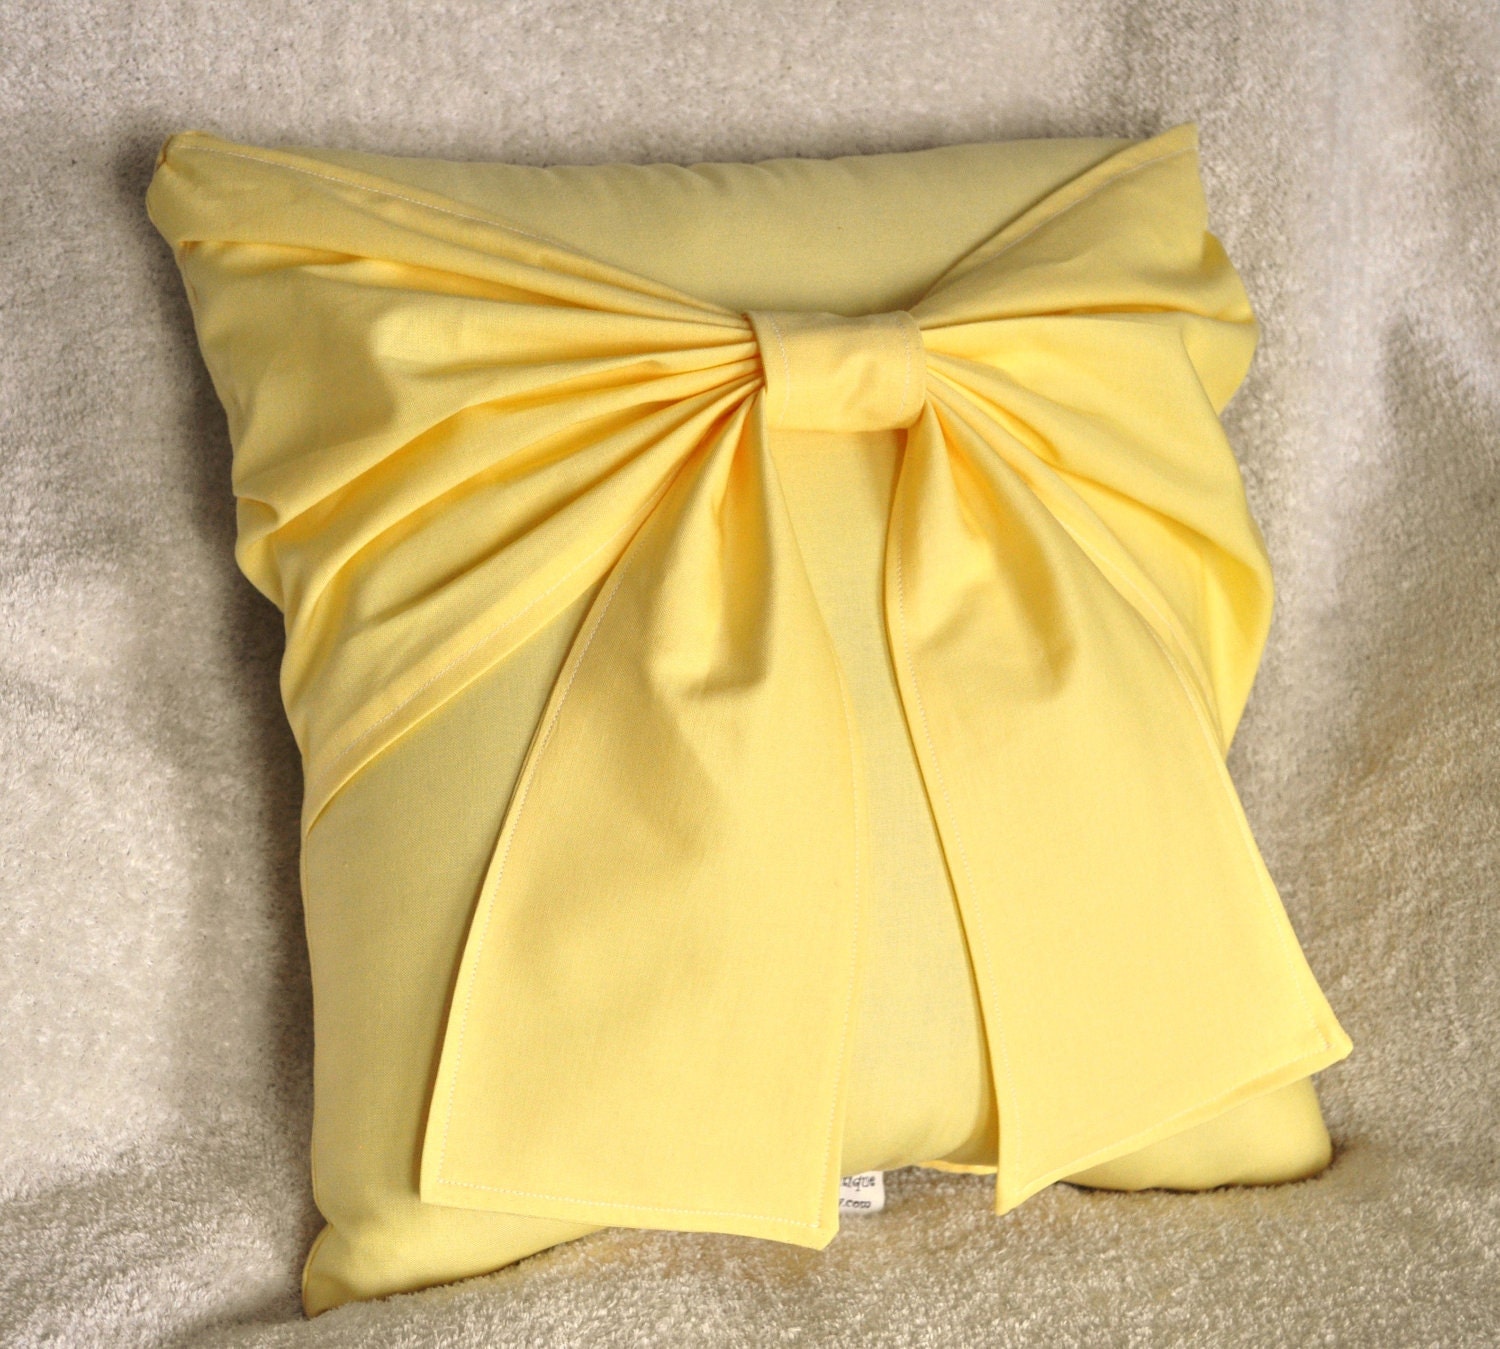 Yellow Bow Pillow Decorative Pillow by bedbuggs on Etsy